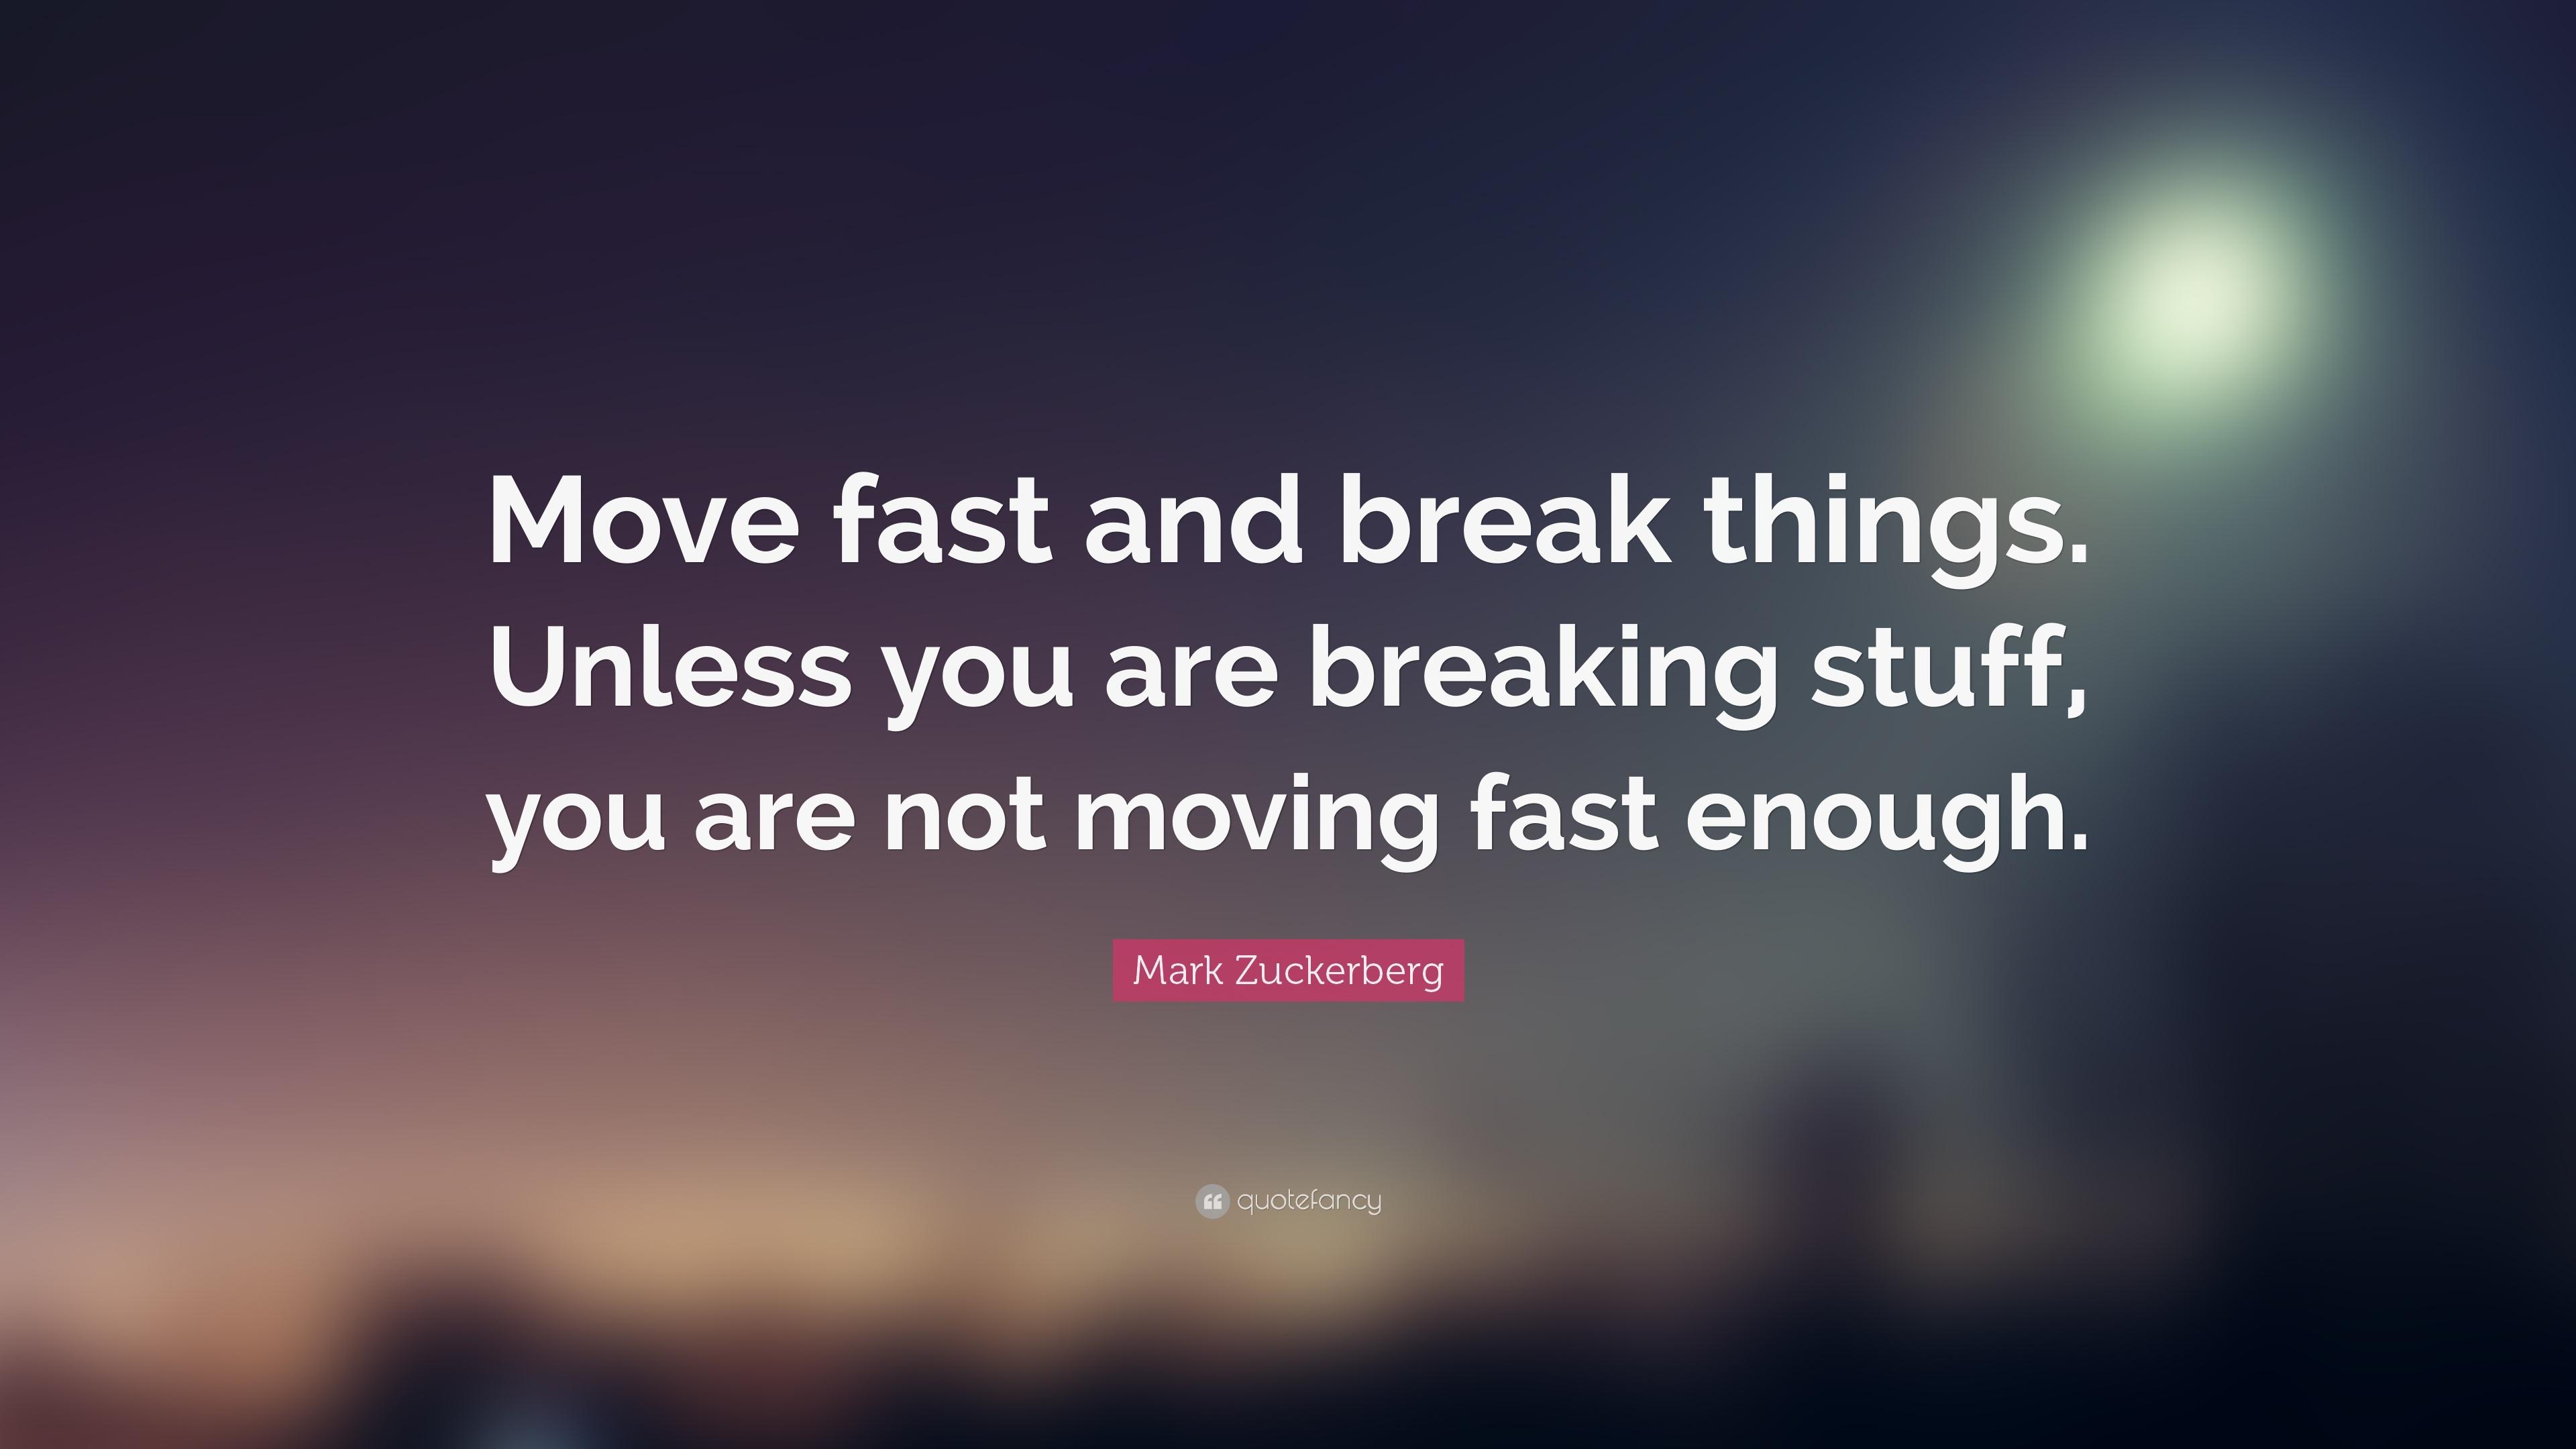 Mark Zuckerberg Quote: “Move fast and break things. Unless you are